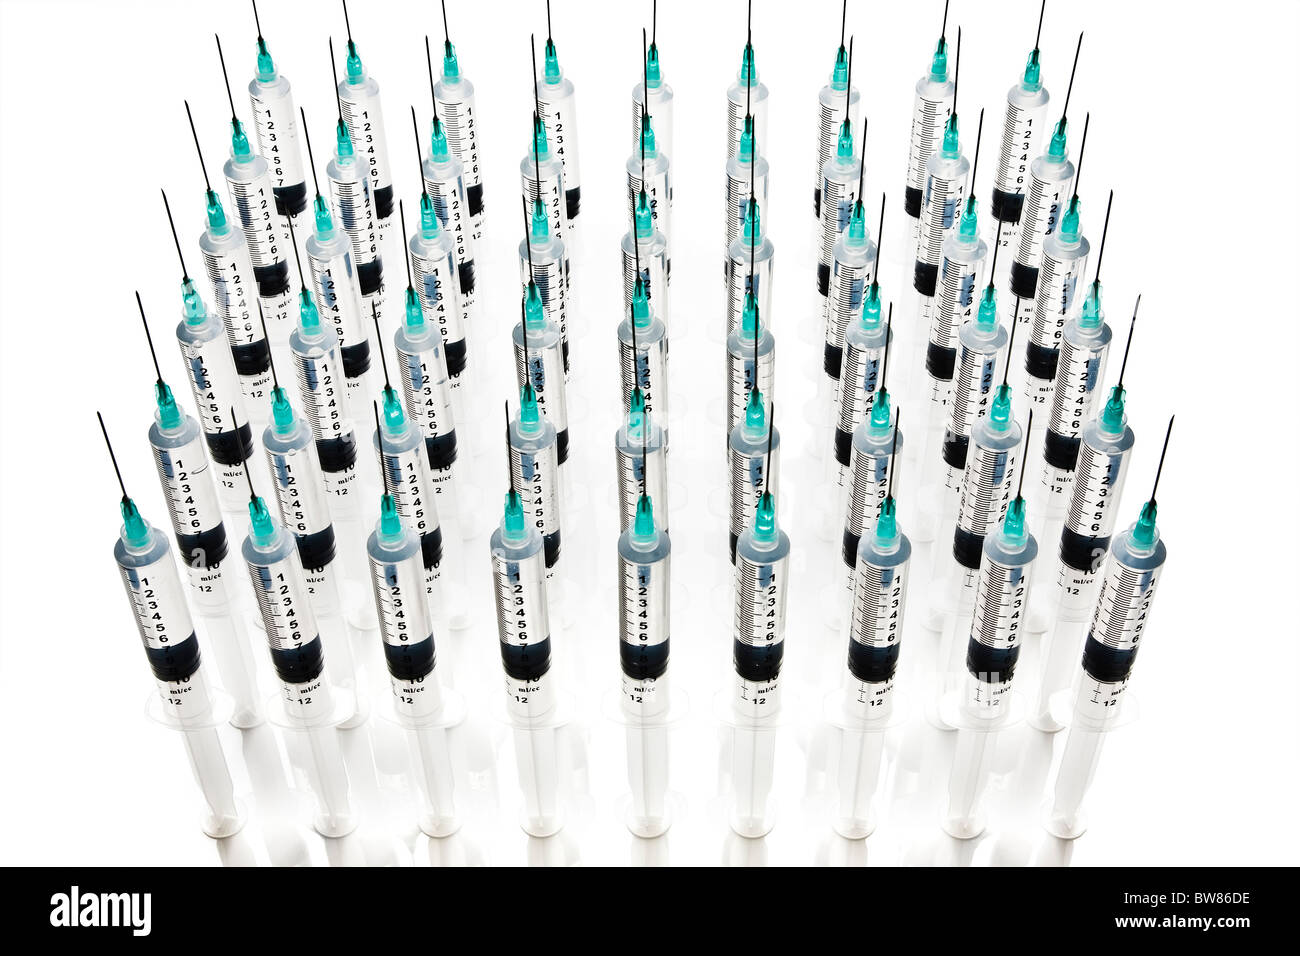 Multiple rows of syringes Stock Photo